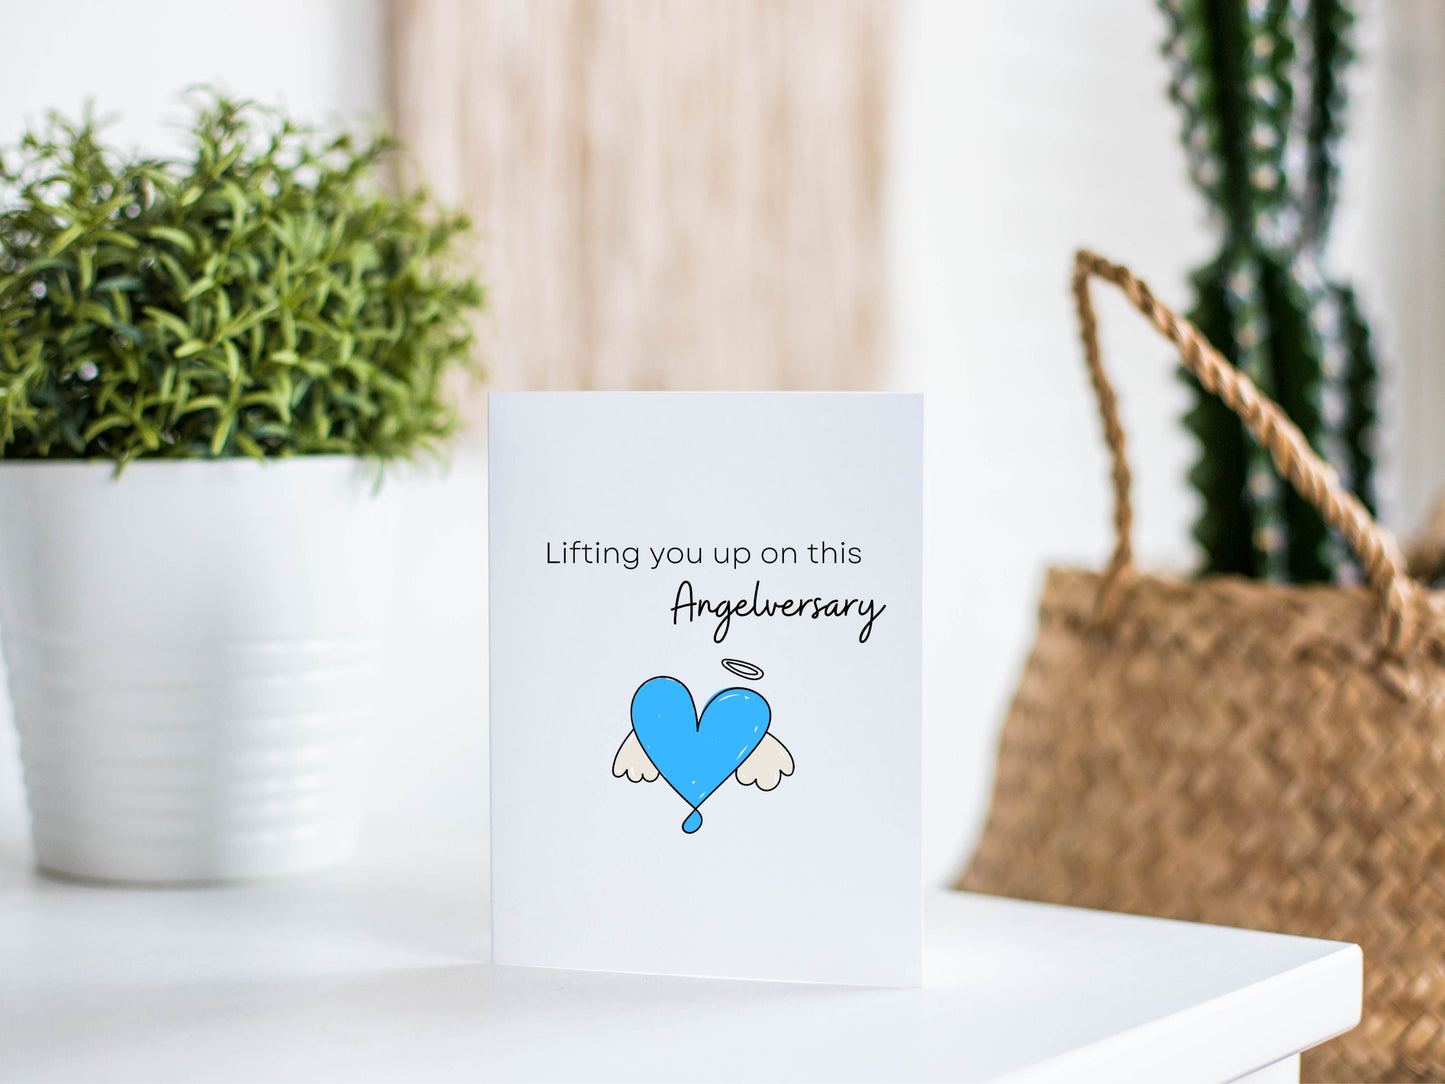 Lifting you up on this Angelversary - Death anniversary card